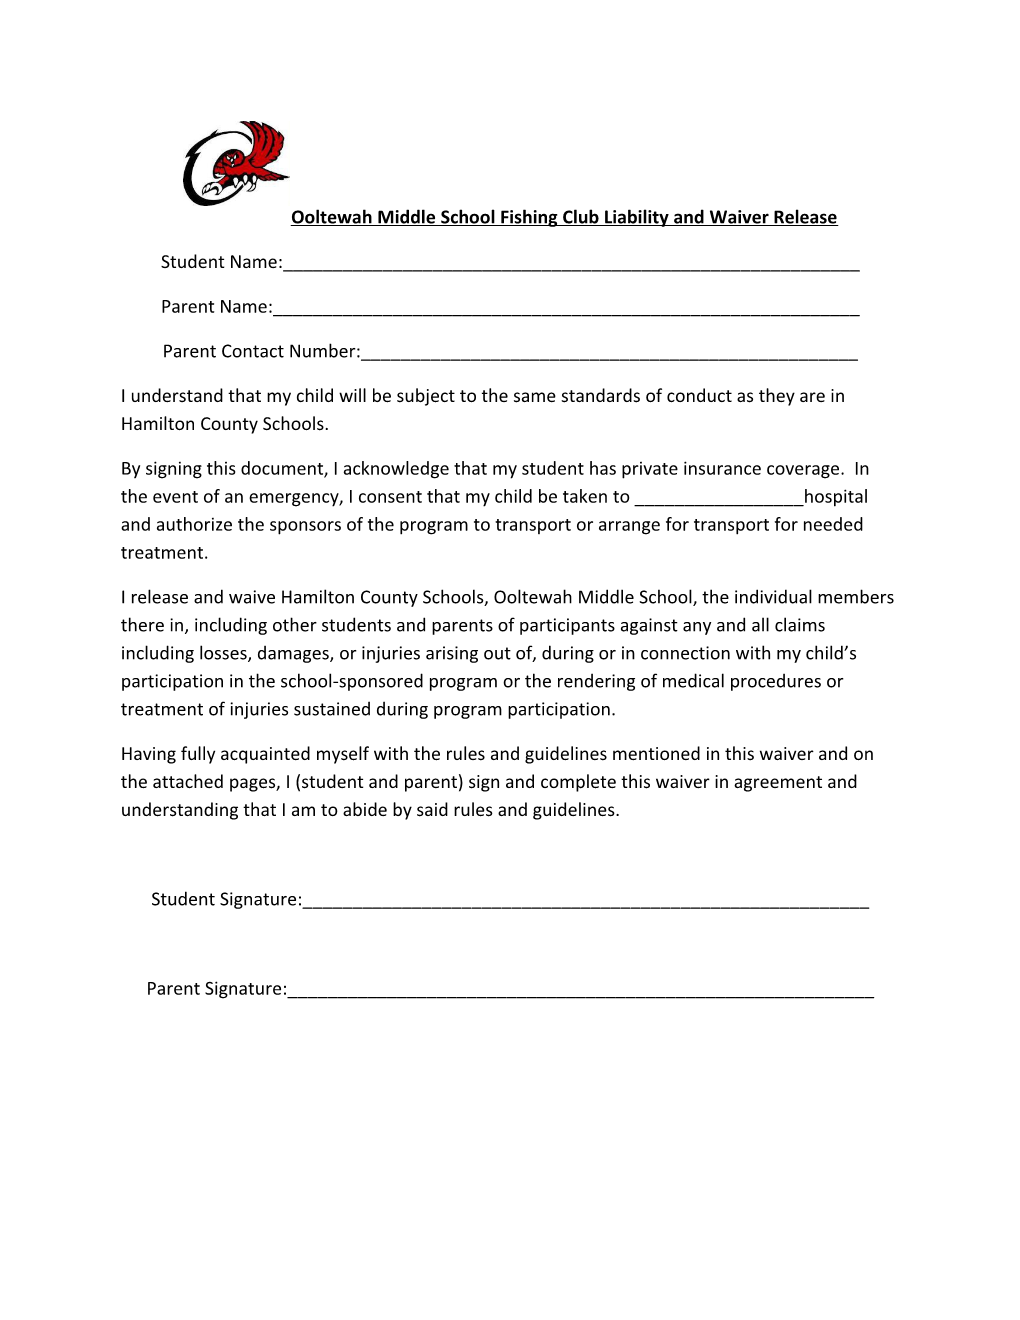 Ooltewah Middle School Fishing Club Liability and Waiver Release